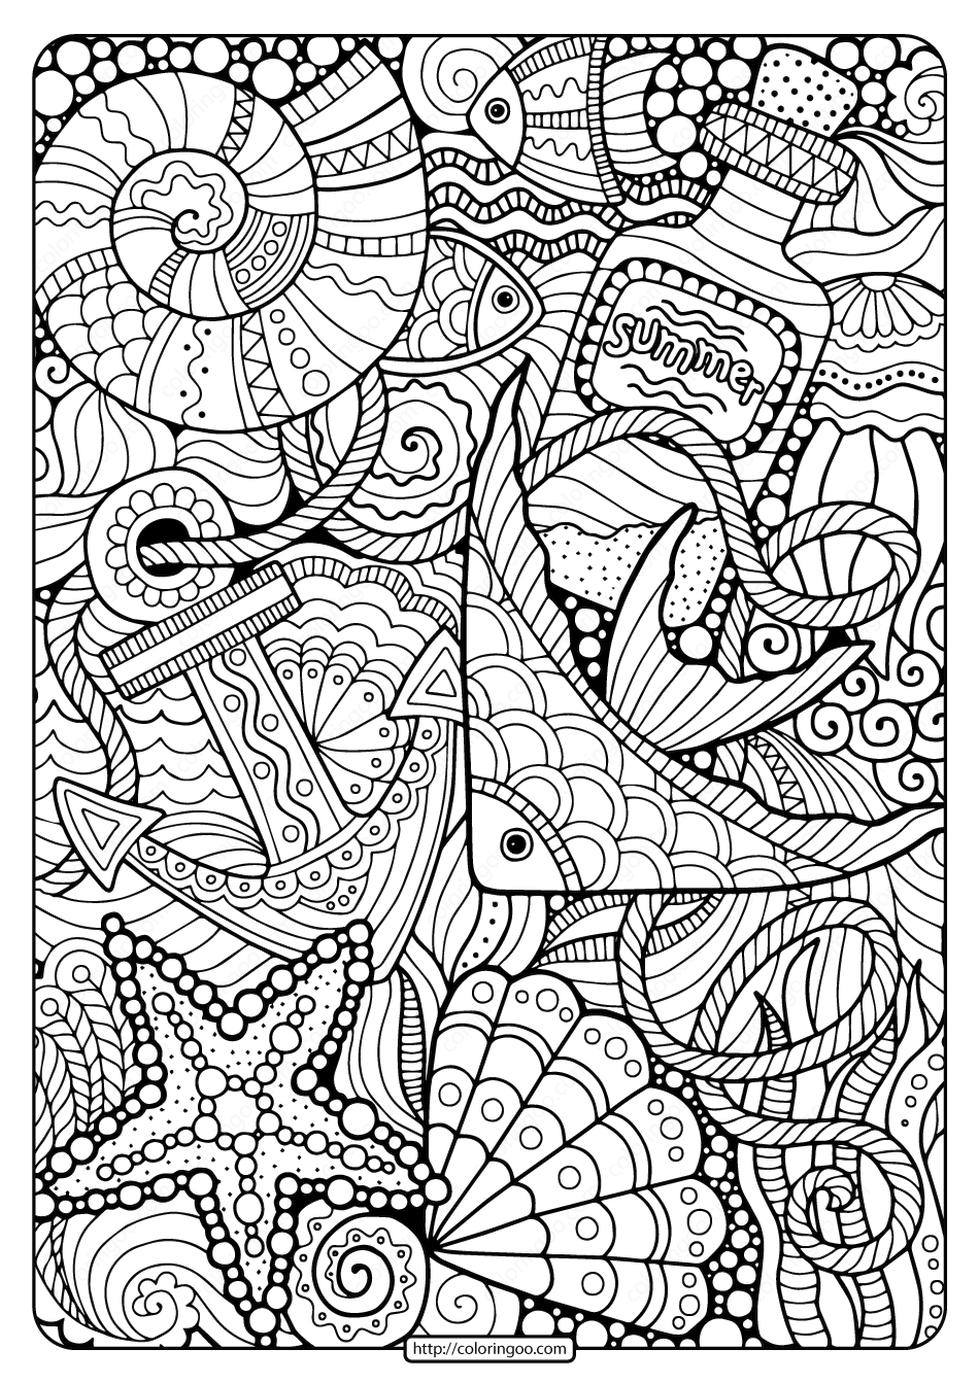 Get This Ocean Coloring Pages For Adults Free Printable Sea Themed Doodle